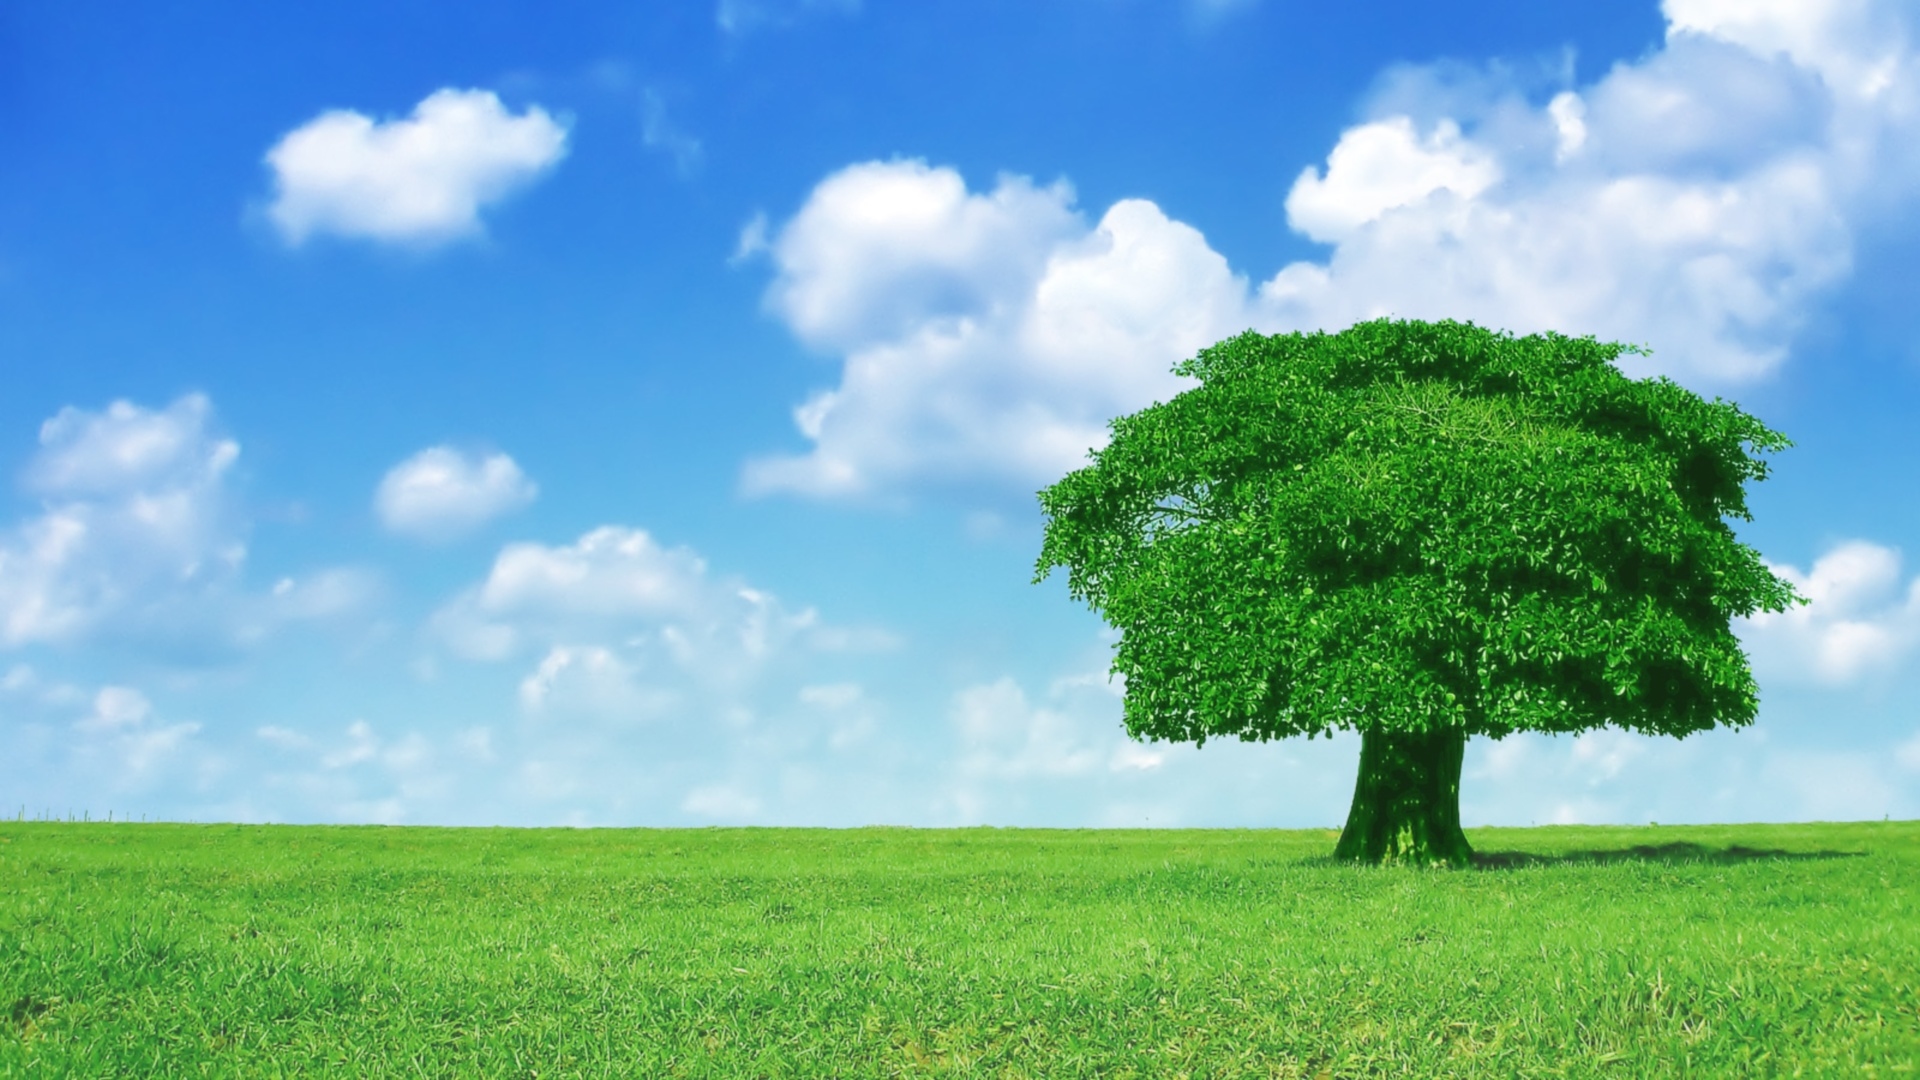 40 HD Tree Wallpapers/Backgrounds For Free Download